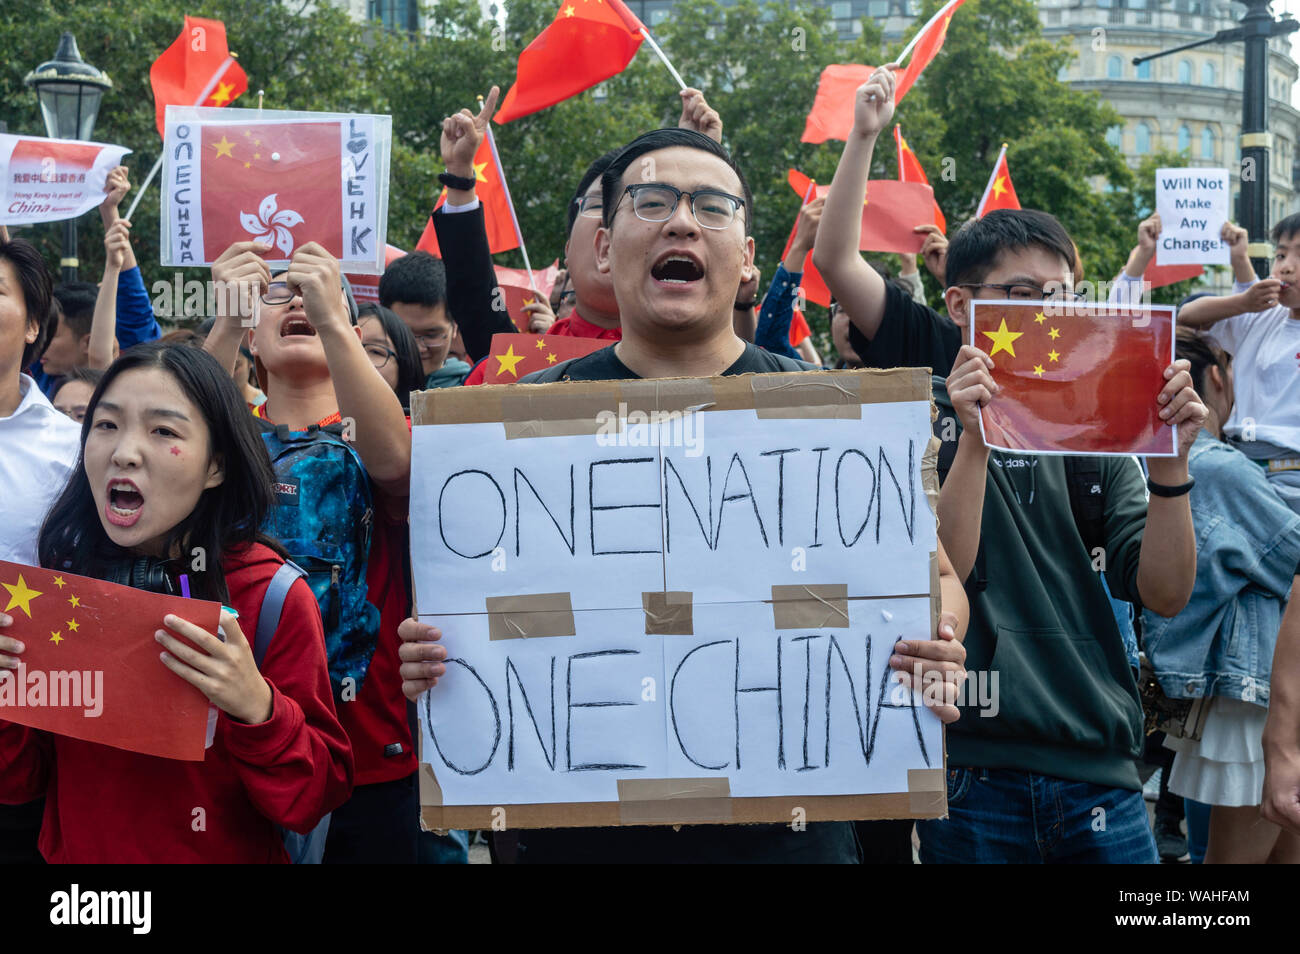 Chinese national holding a 'One Nation. One China.' banner at the UK Solidarity with Hong Kong rally. Stock Photo